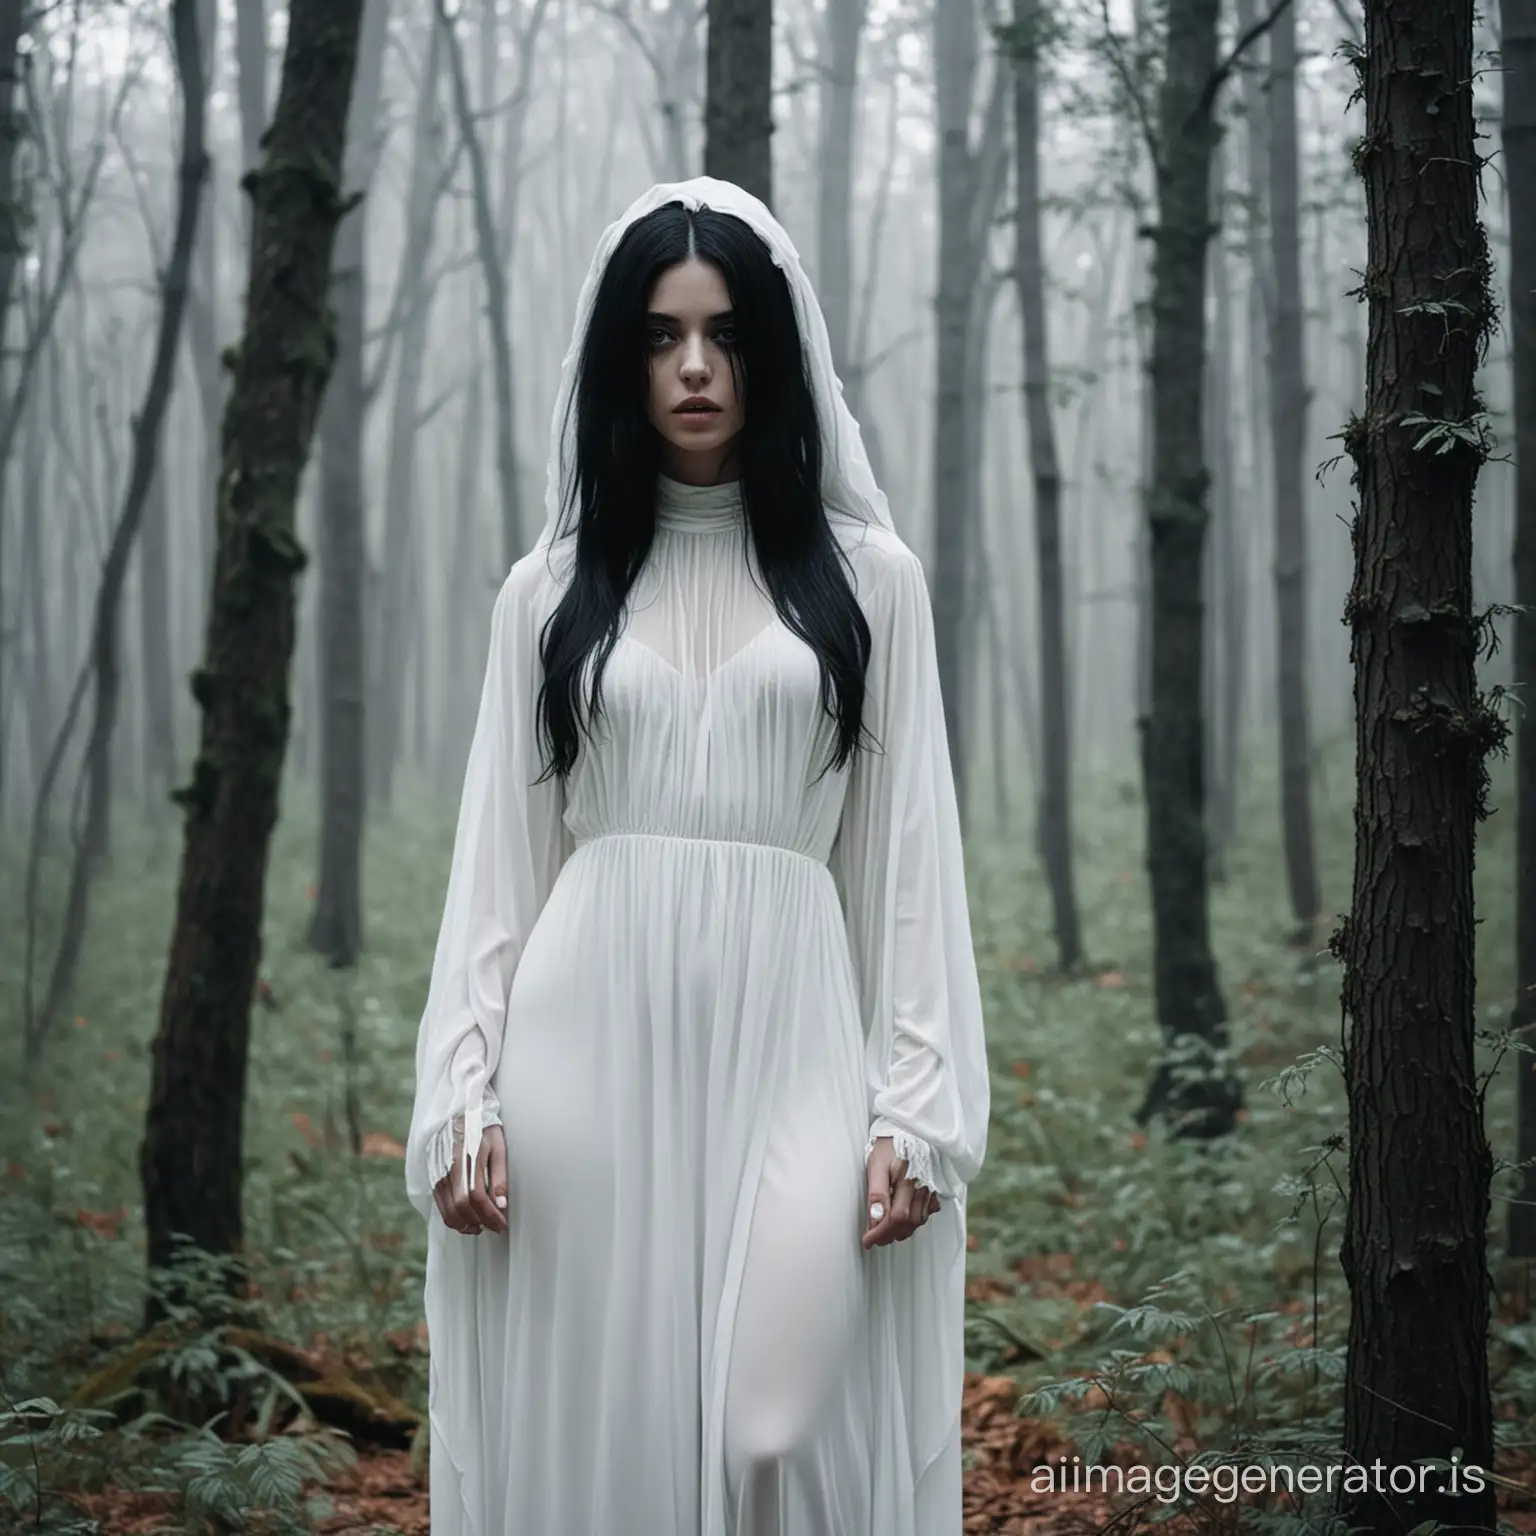 a full white dressed woman in the forest, looks cute but kinda creepy and her skin is pale. scary black spirits around her and she has a black hair.
